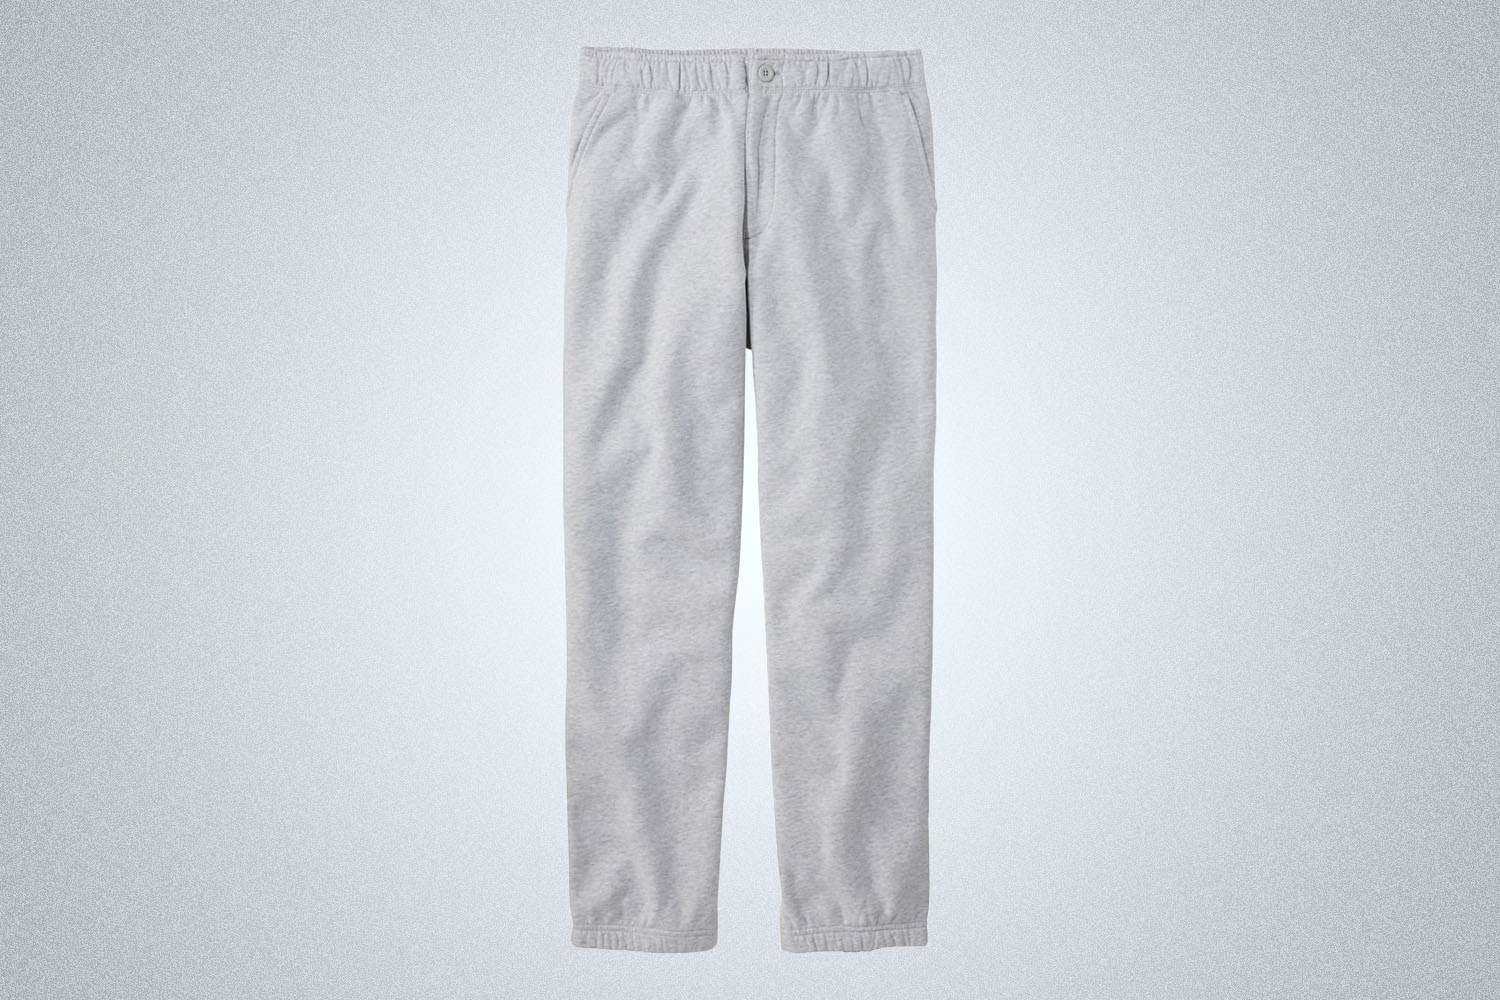 a pair fo athletic sweatpants